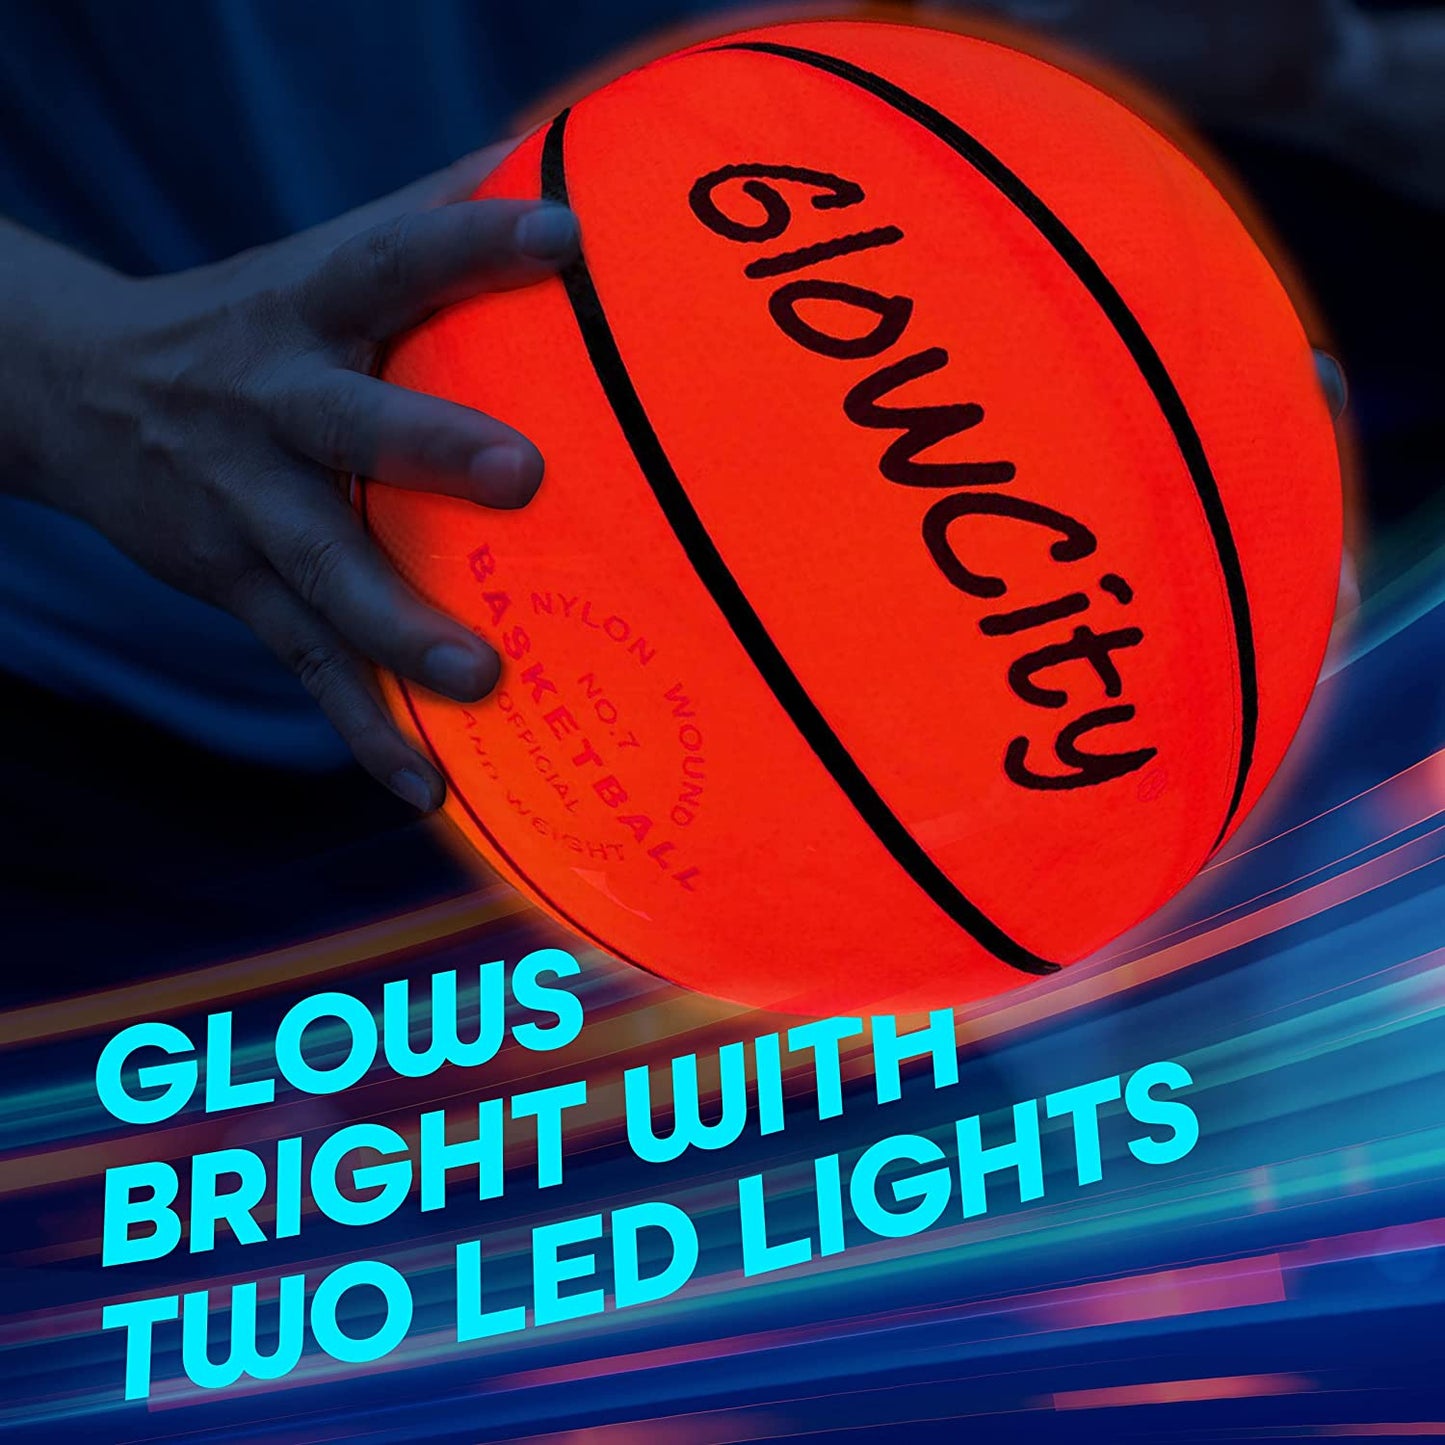 Glow in the Dark Basketball for Teen Boy - Glowing Red Basket Ball, Light up LED Toy for Night Ball Games - Sports Stuff & Gadgets for Kids Age 8 Years Old and Up